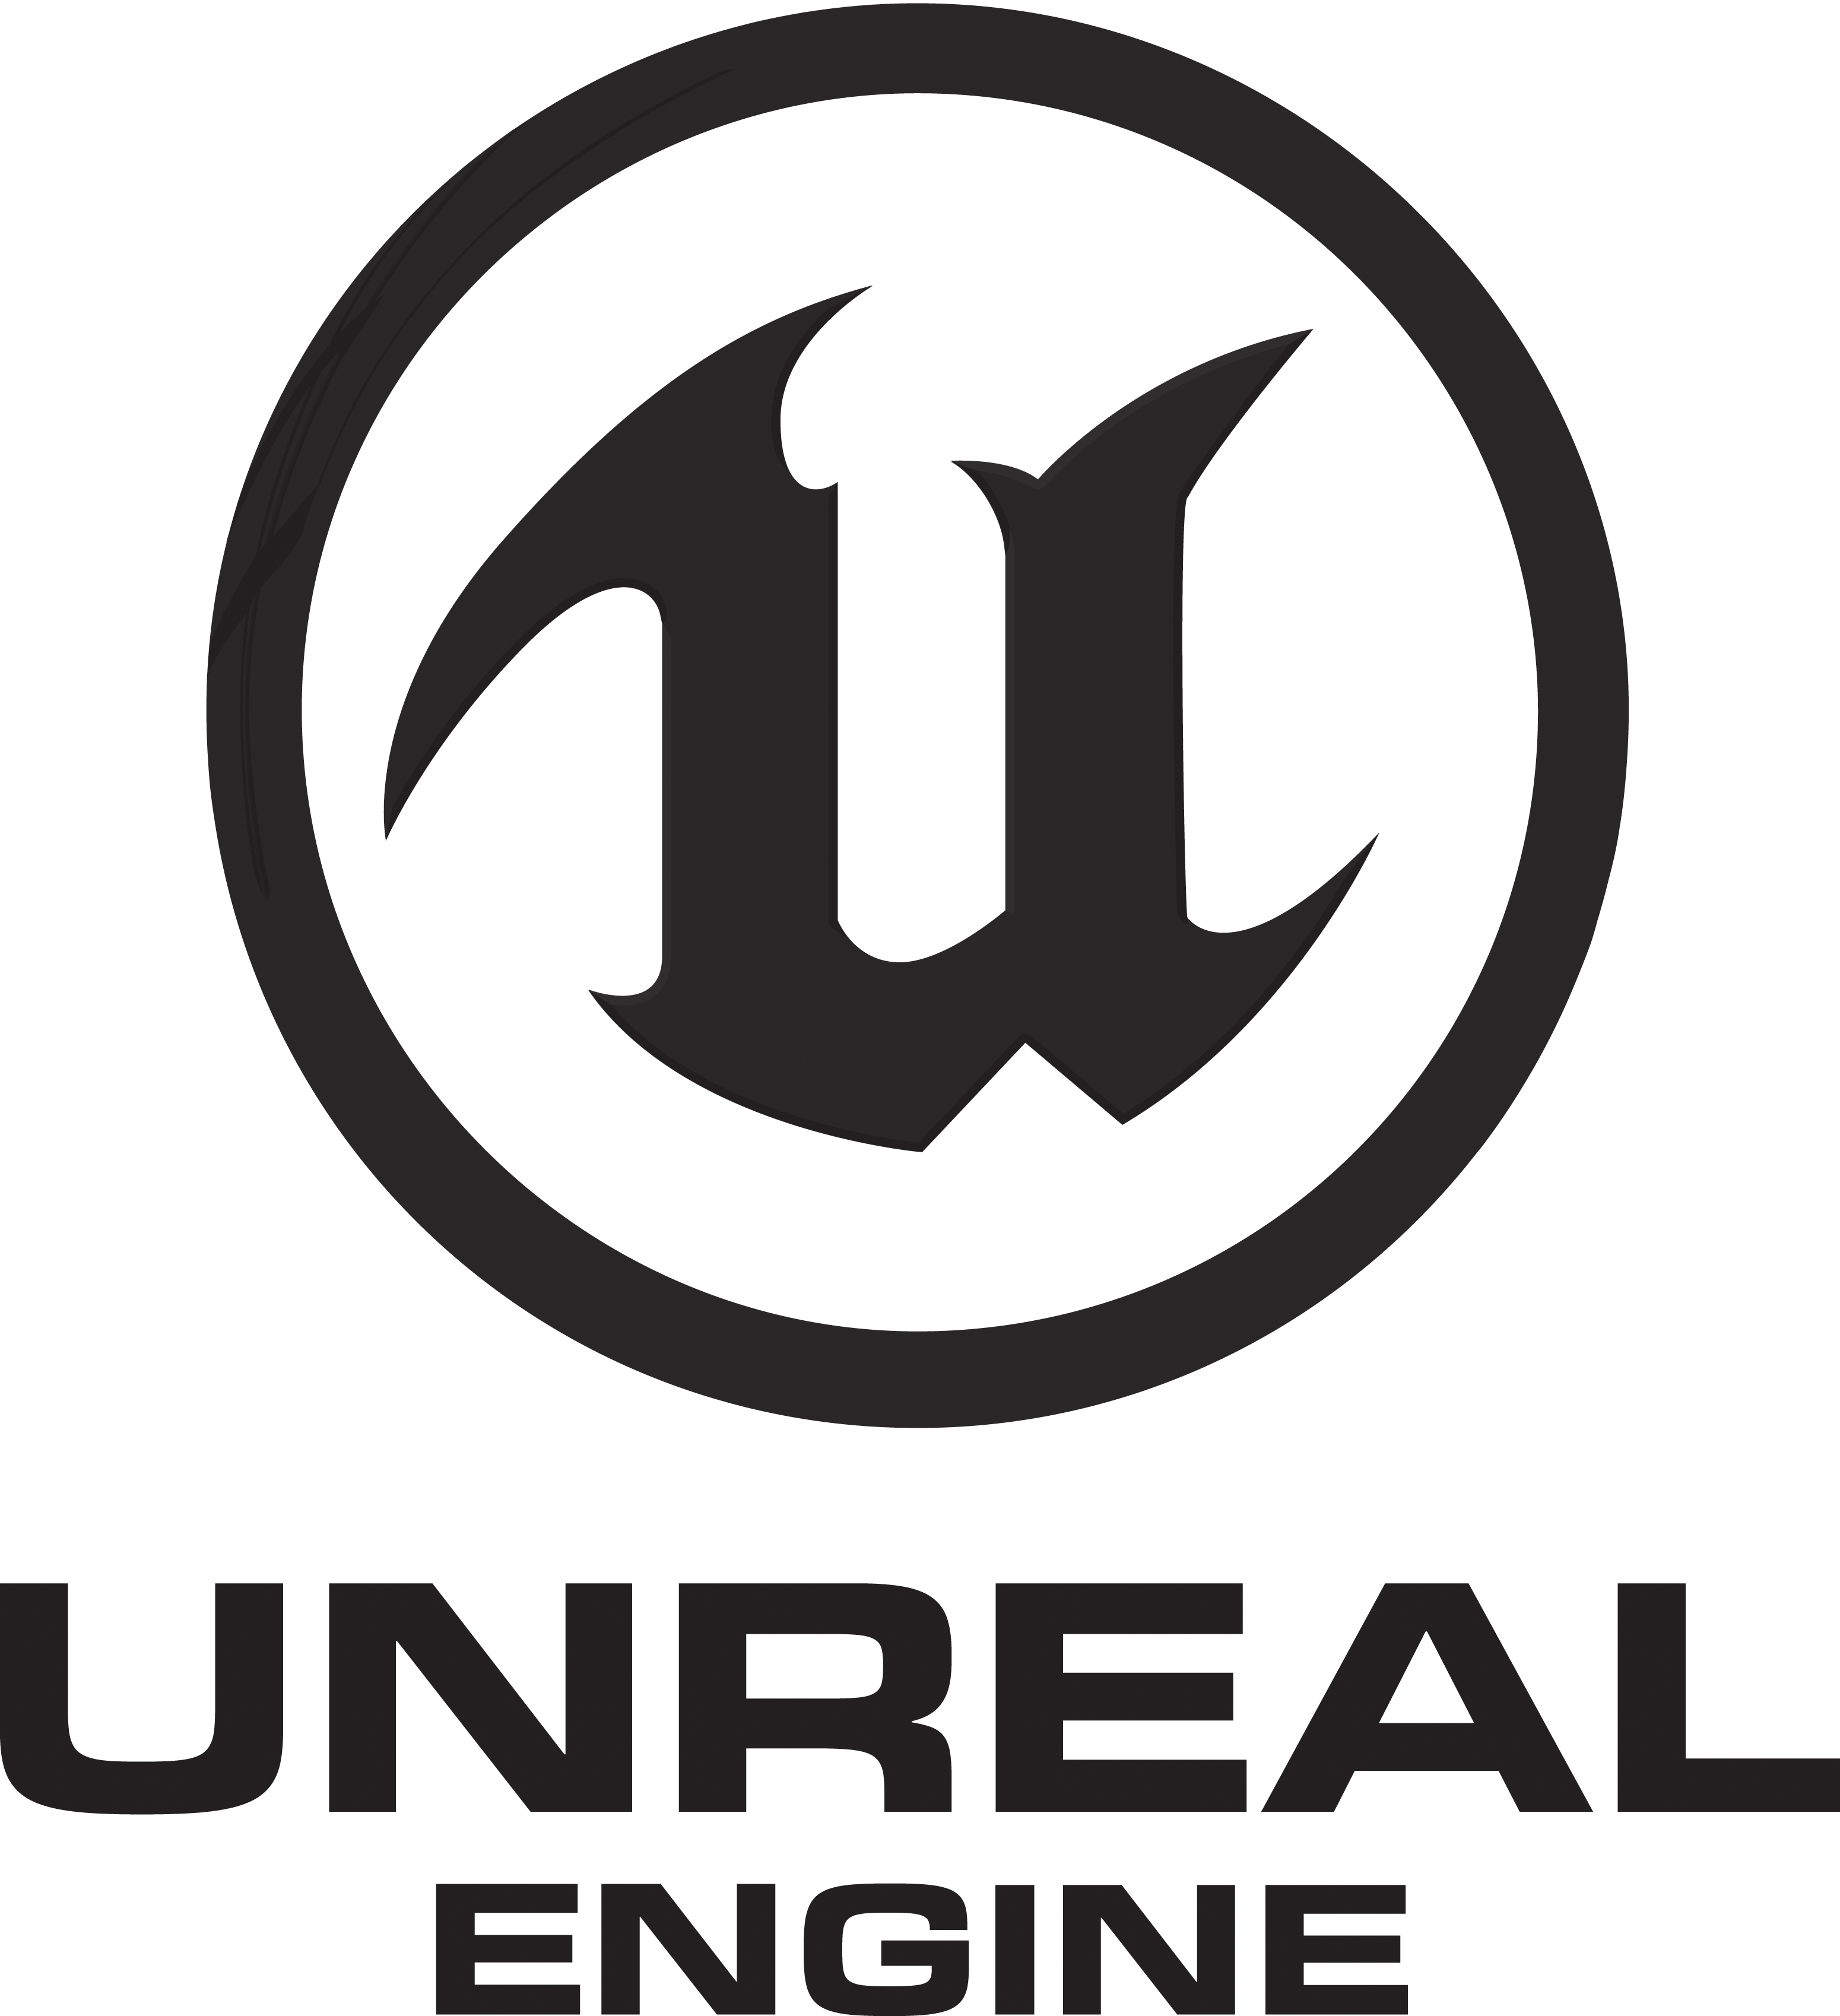 Unreal Logo - Pin by Thomas Pickles on A2 graphics | Unreal engine, Logos, Game logo